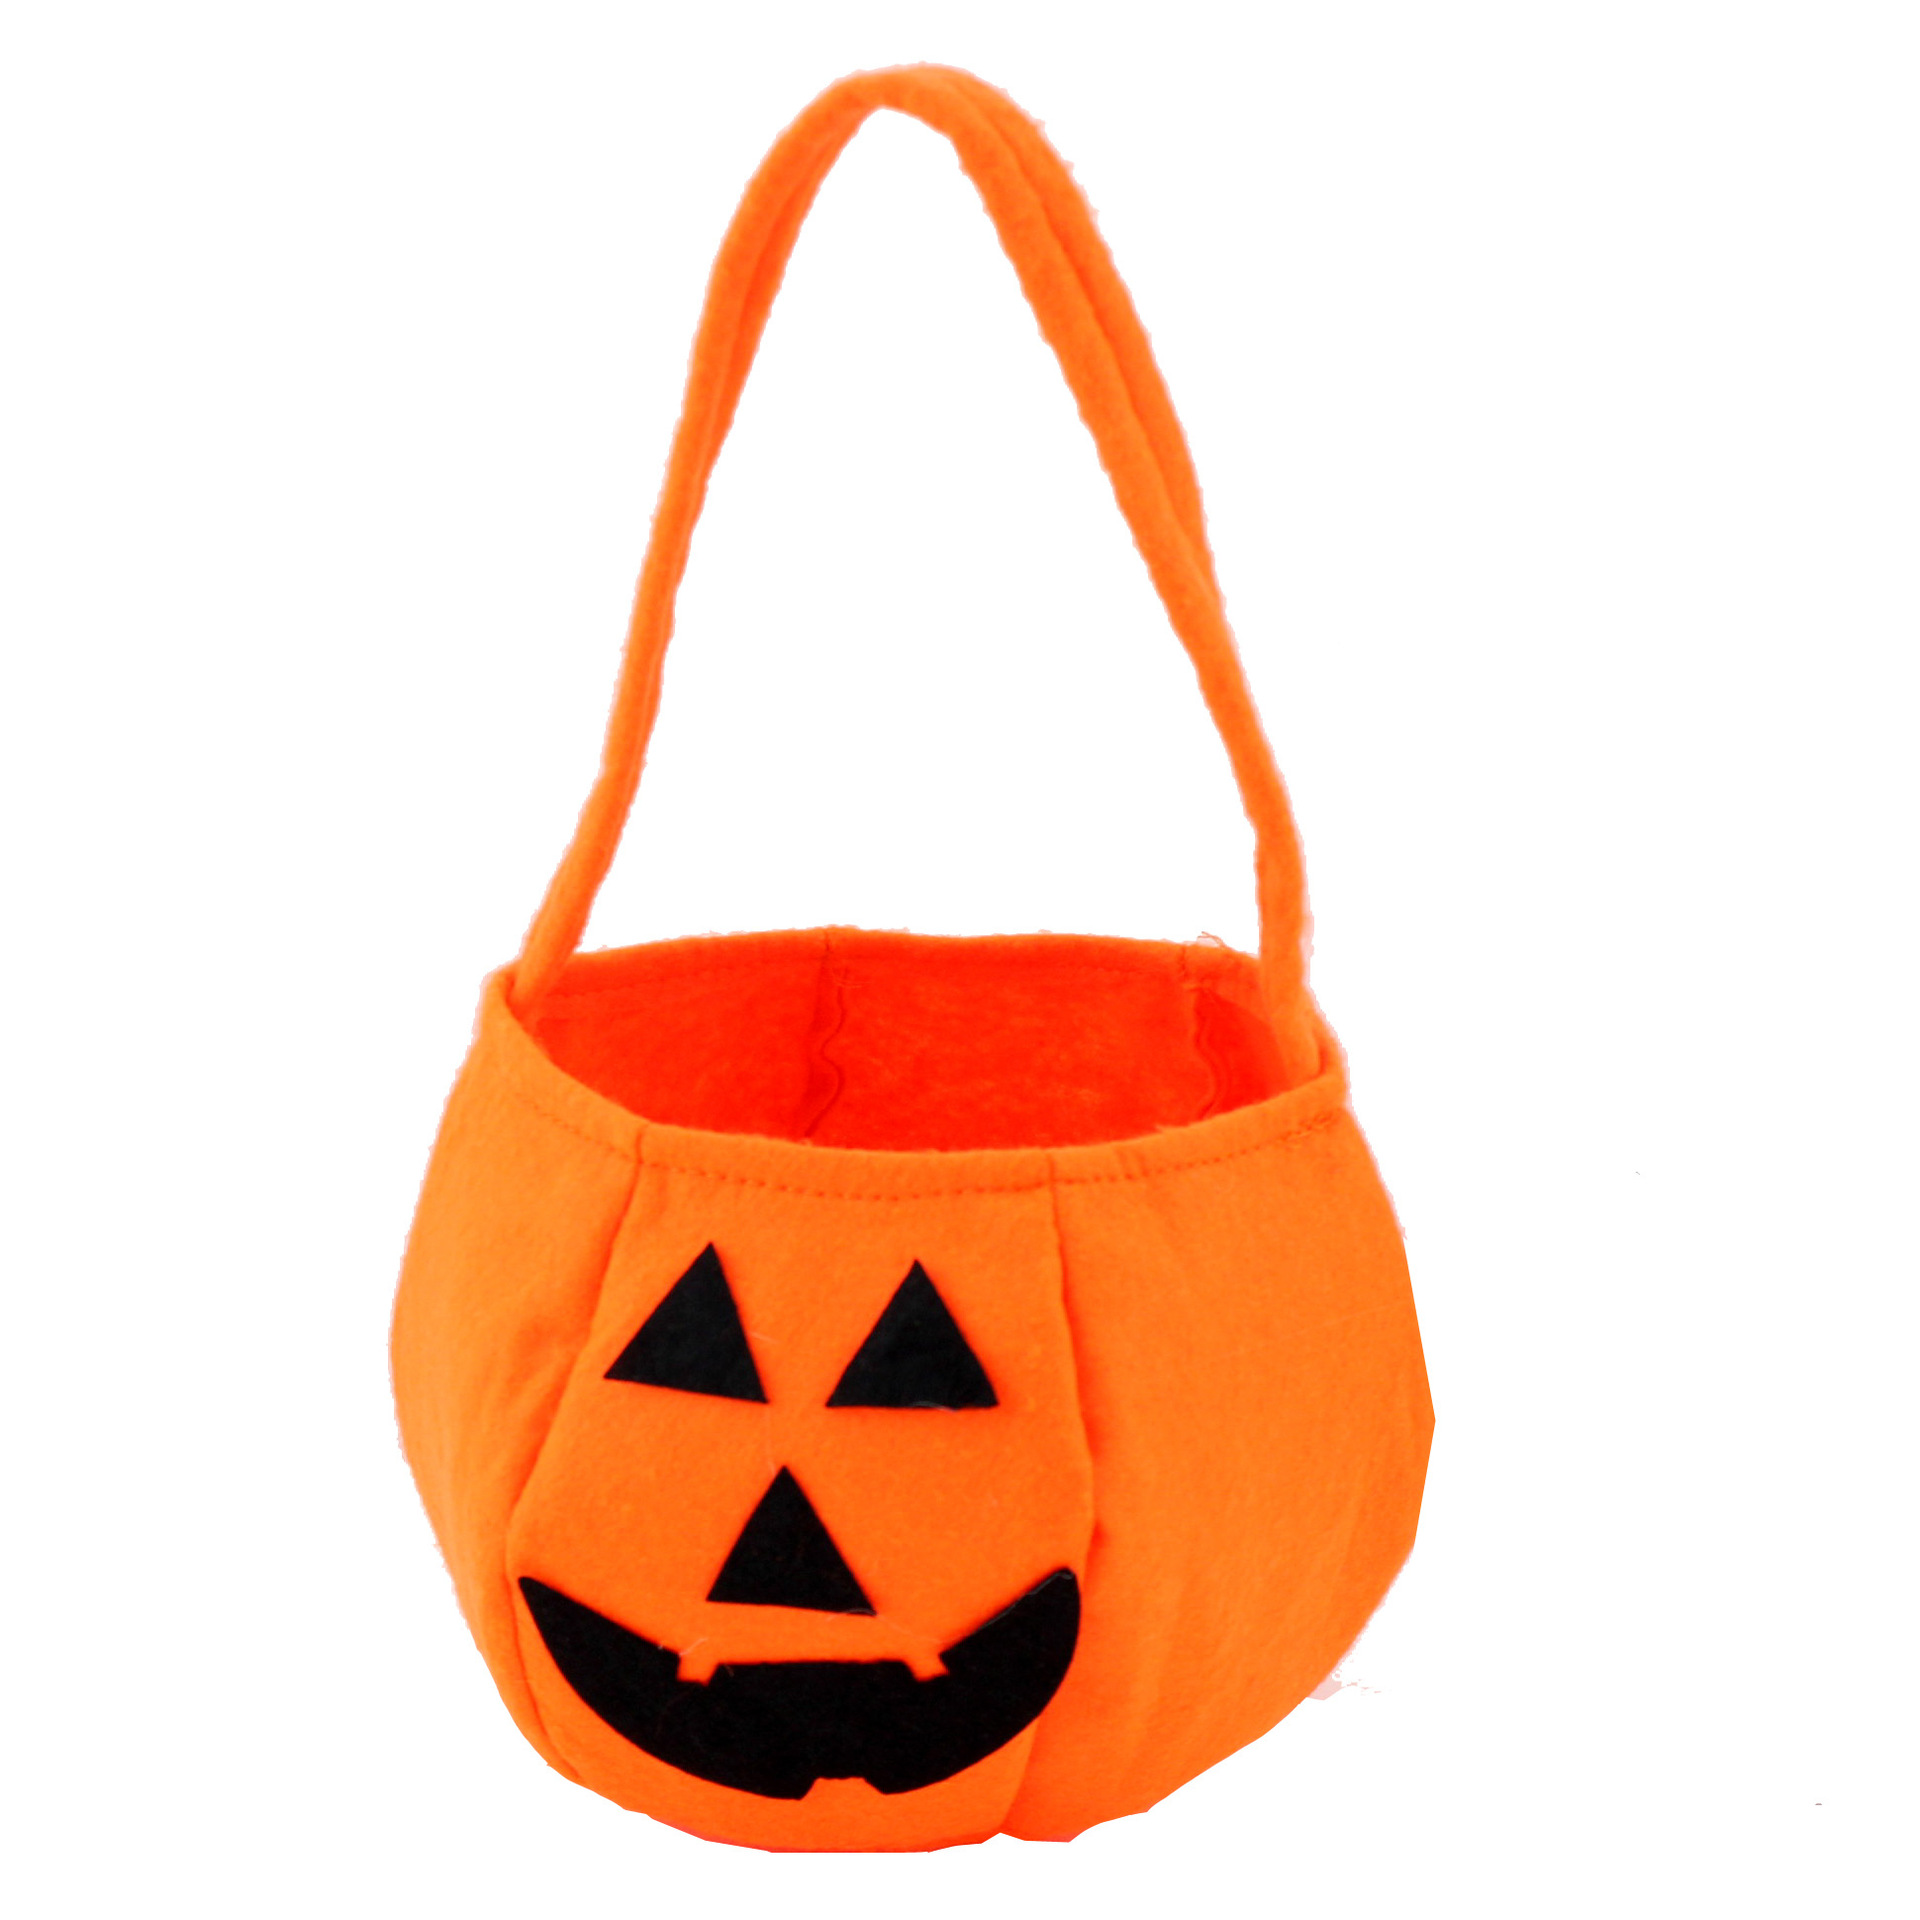 Halloween Favor Goodie Pumpkin Candy Bag For Treat Or Trick